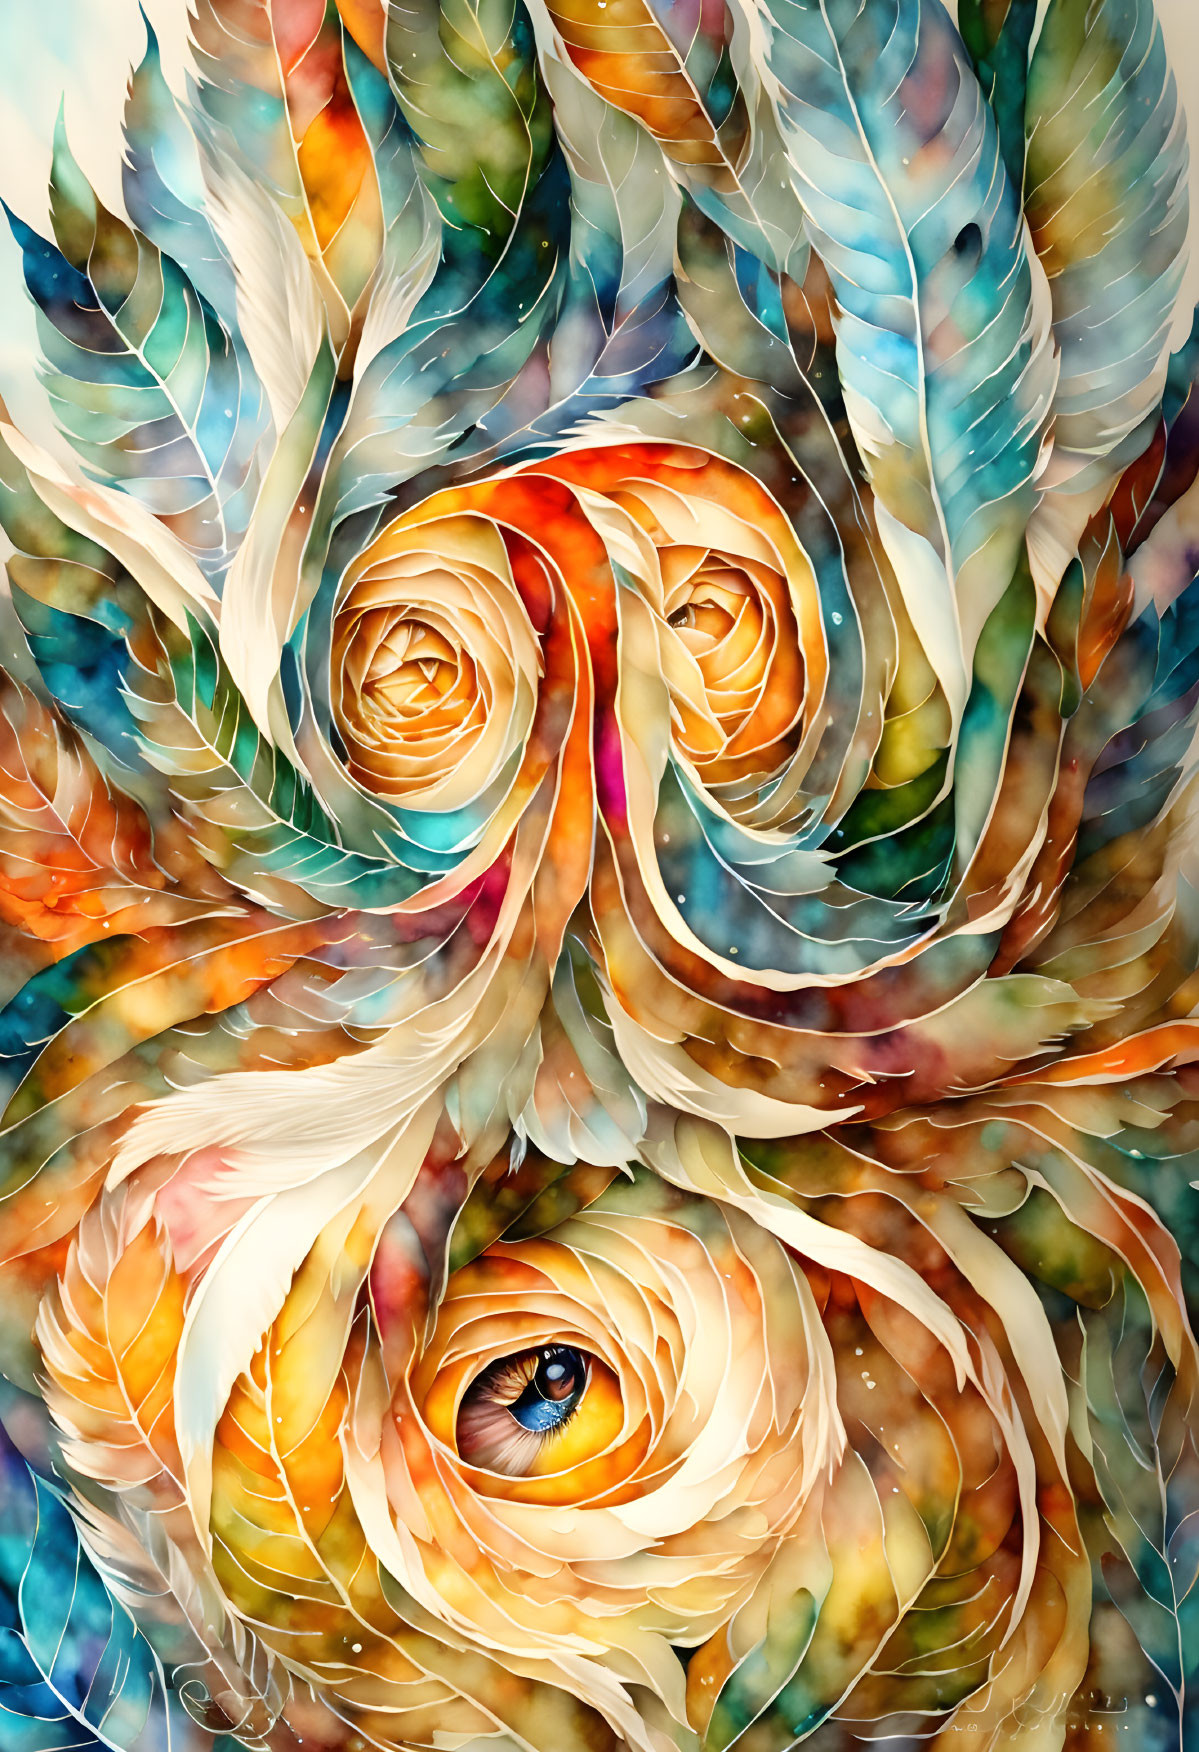 Colorful Watercolor Painting with Feathers and Eye in Blue, Yellow, and Orange Palette